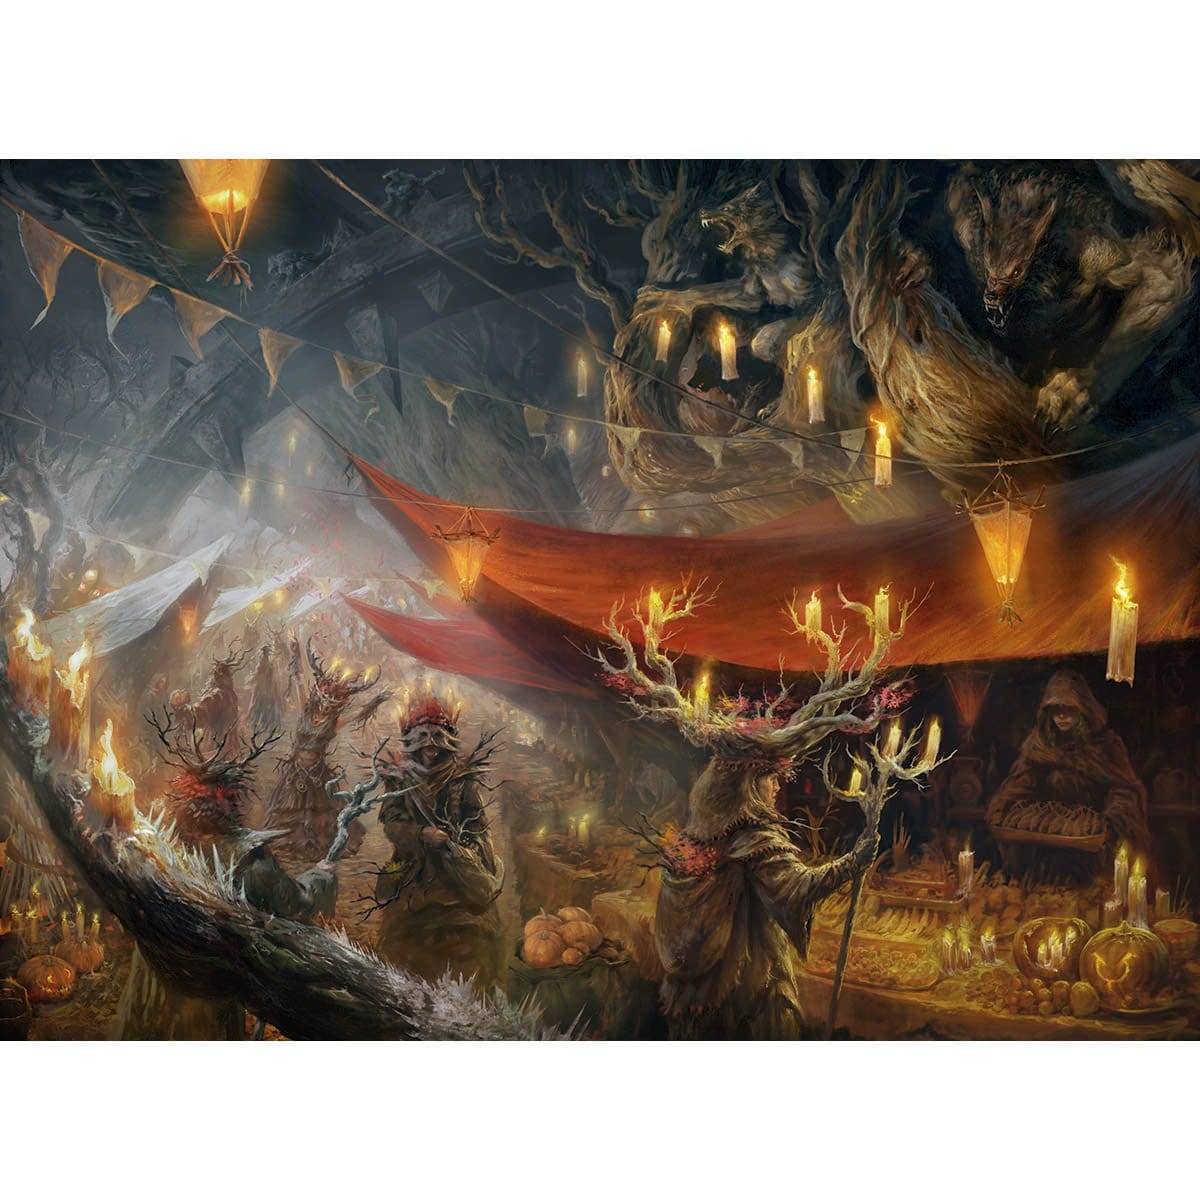 Lord of the Rings: The Fellowship of the Ring Fine Art Print by Darren Tan